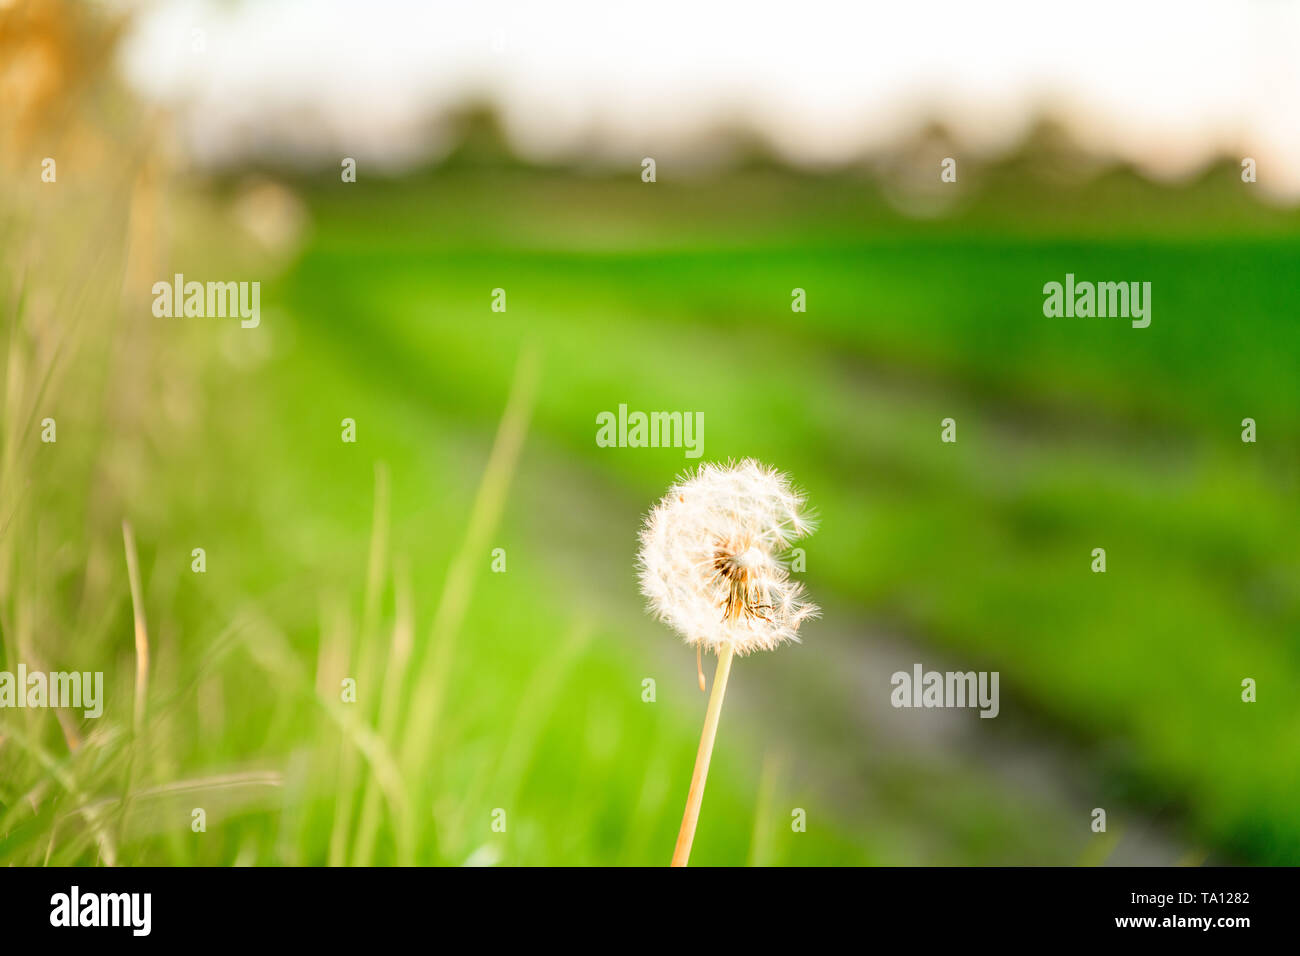 Common Dandelion ( Taraxacum ) growing in a wheat field. UK agriculture. Oxford, UK. Stock Photo